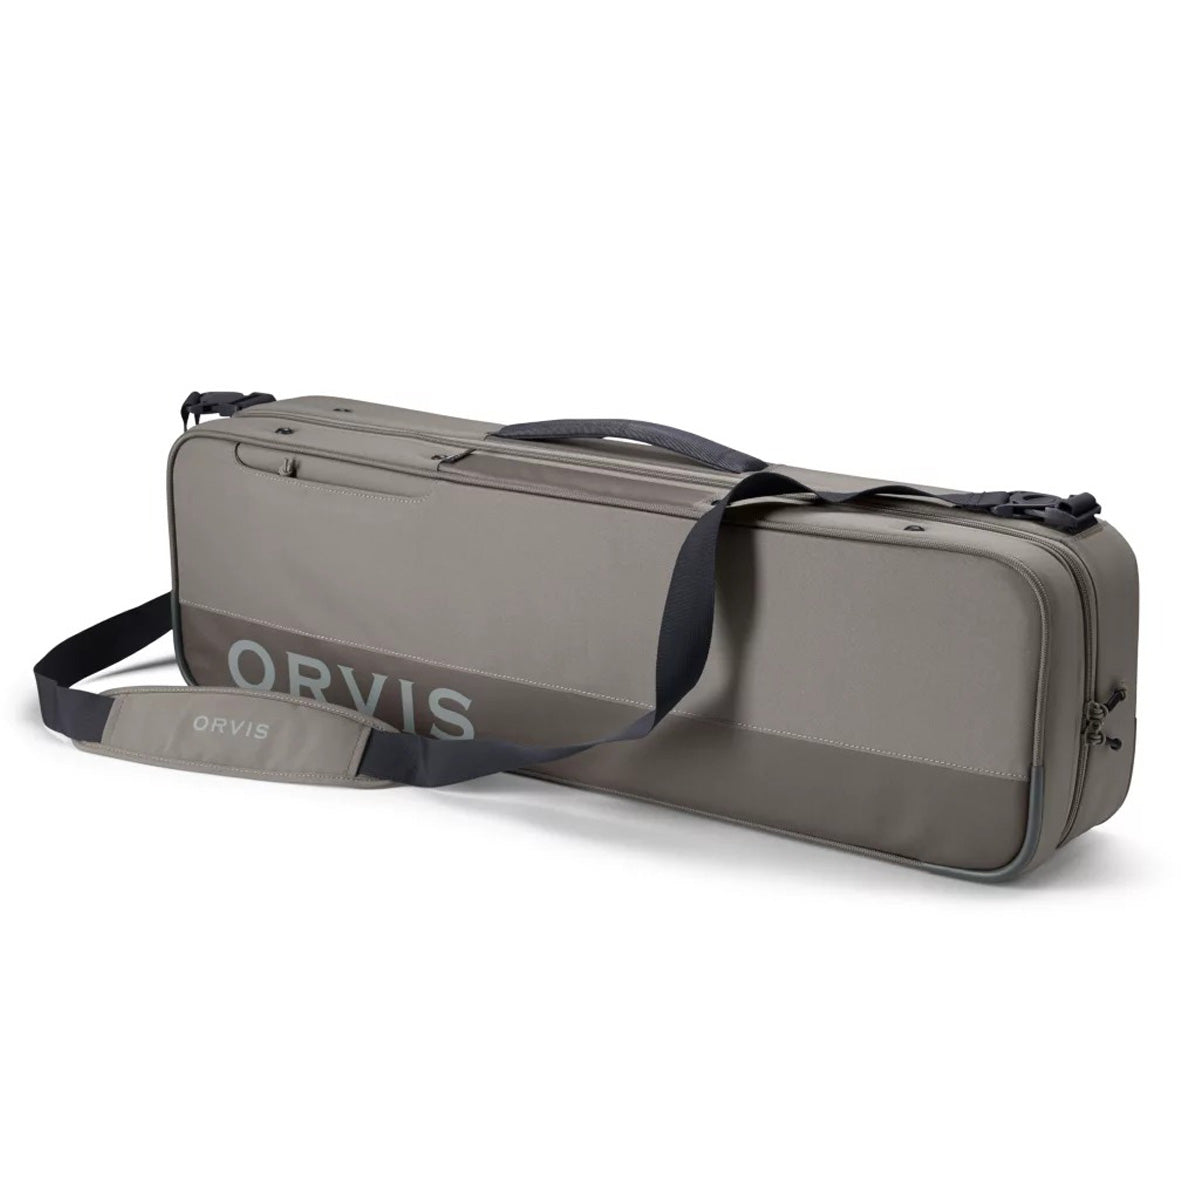 Orvis Carry-it-all